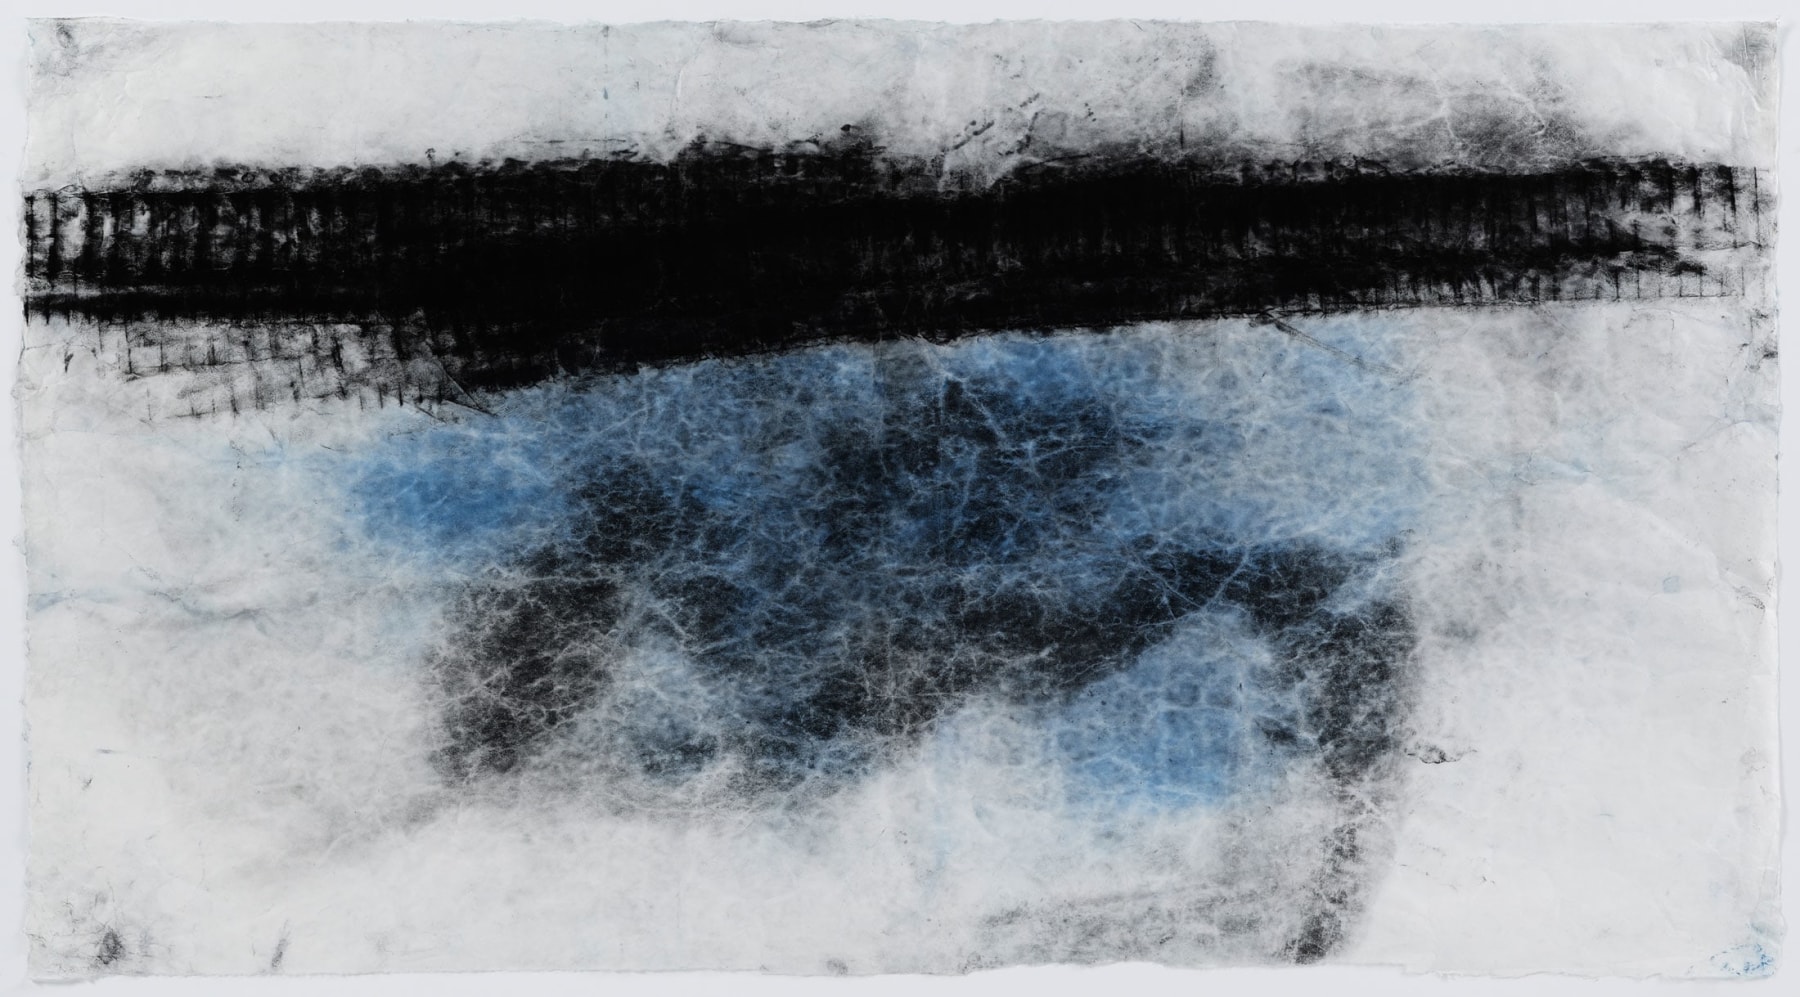 Jason Moran
These Storms are Ancestral 3, 2020
Pigment on Gampi paper
42 1/2 x 78 1/4 inches
(108 x 198.8 cm)